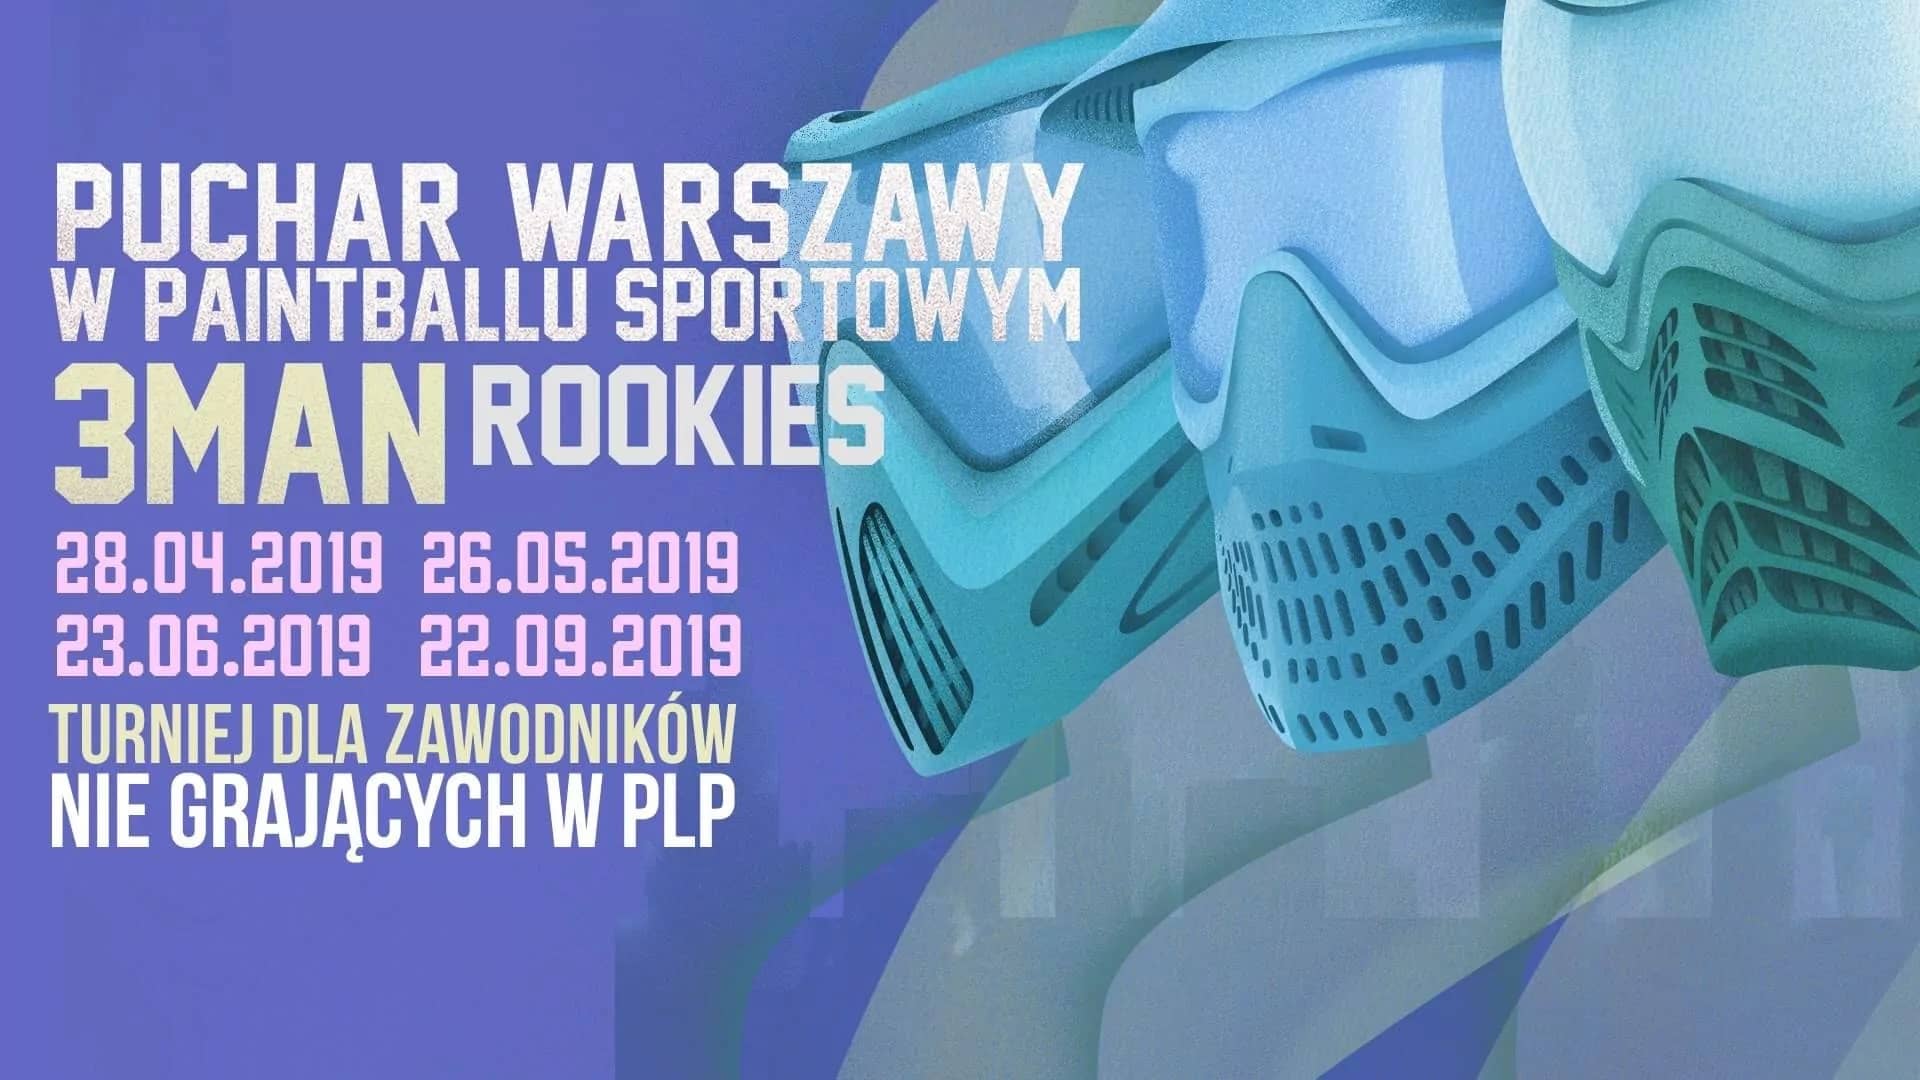 You are currently viewing VI PAINTBALLOWY PUCHAR WARSZAWY